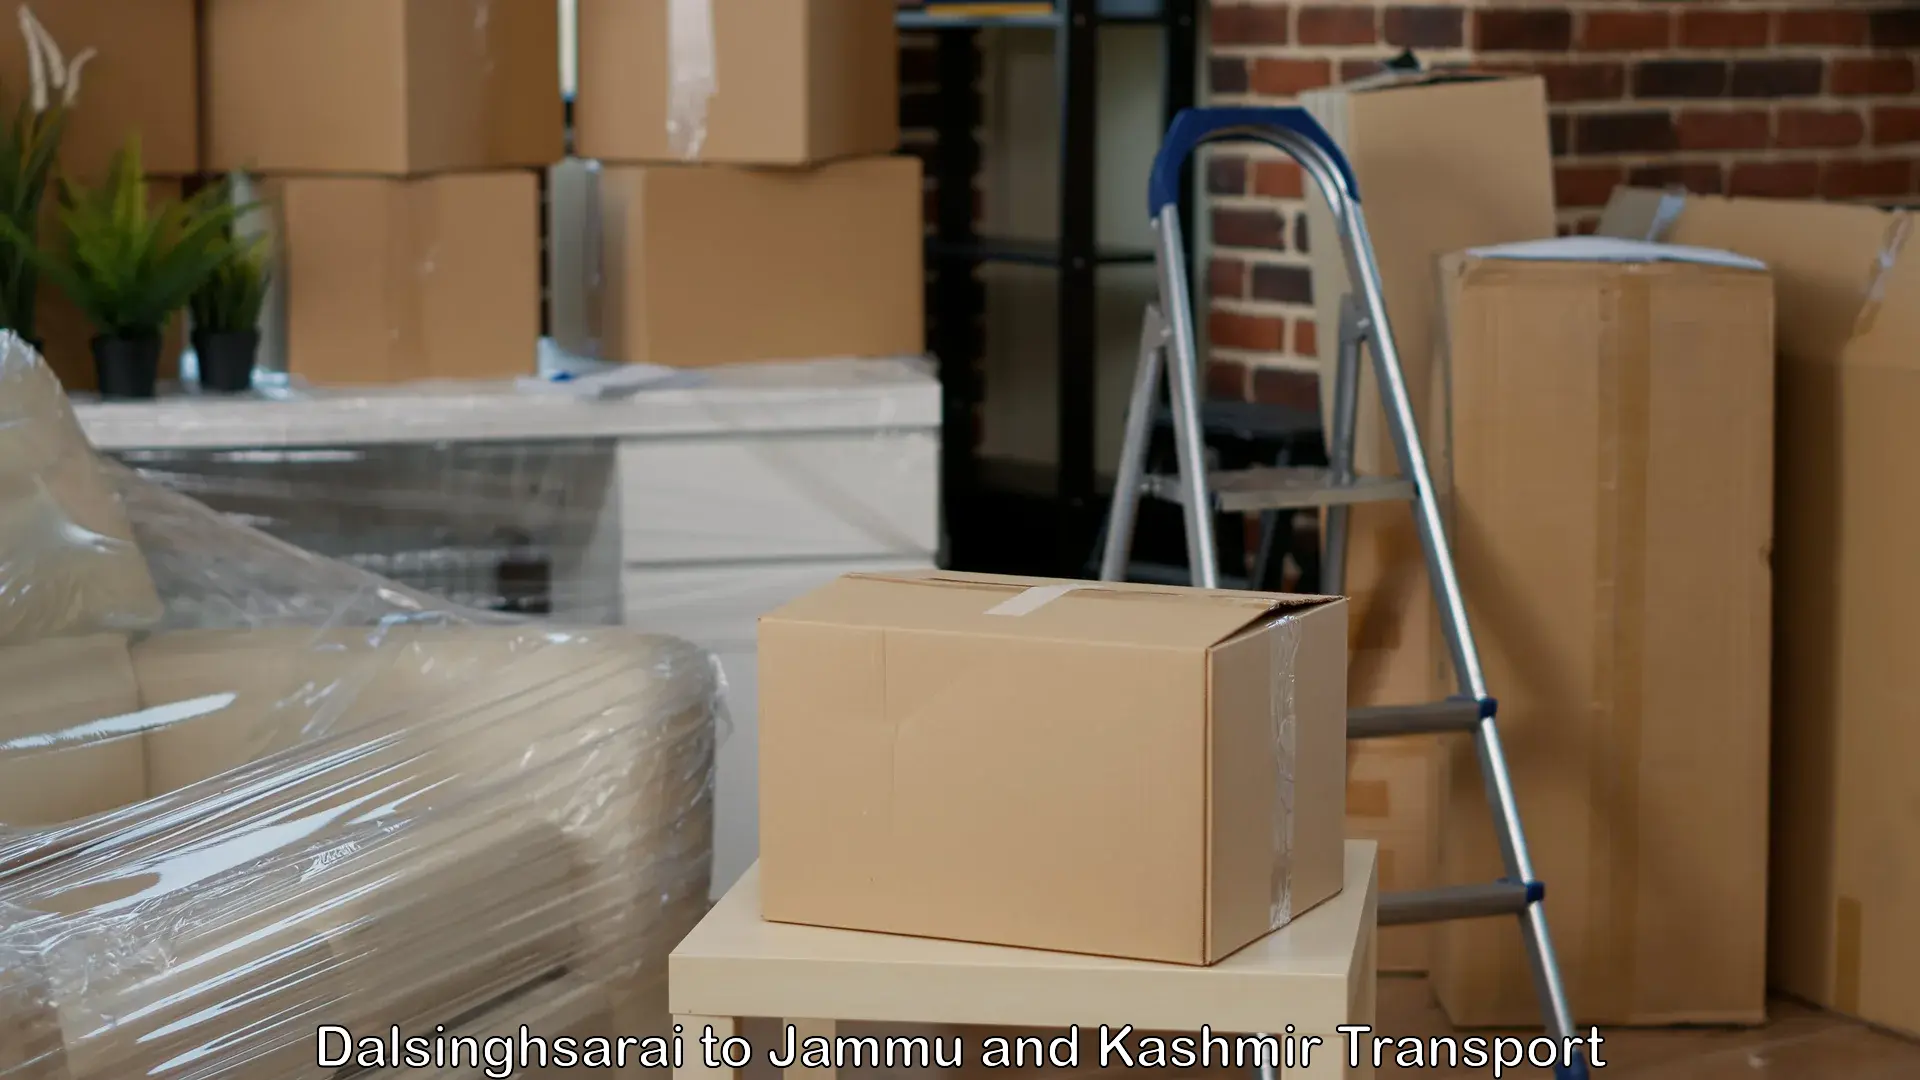 Container transportation services Dalsinghsarai to Jammu and Kashmir